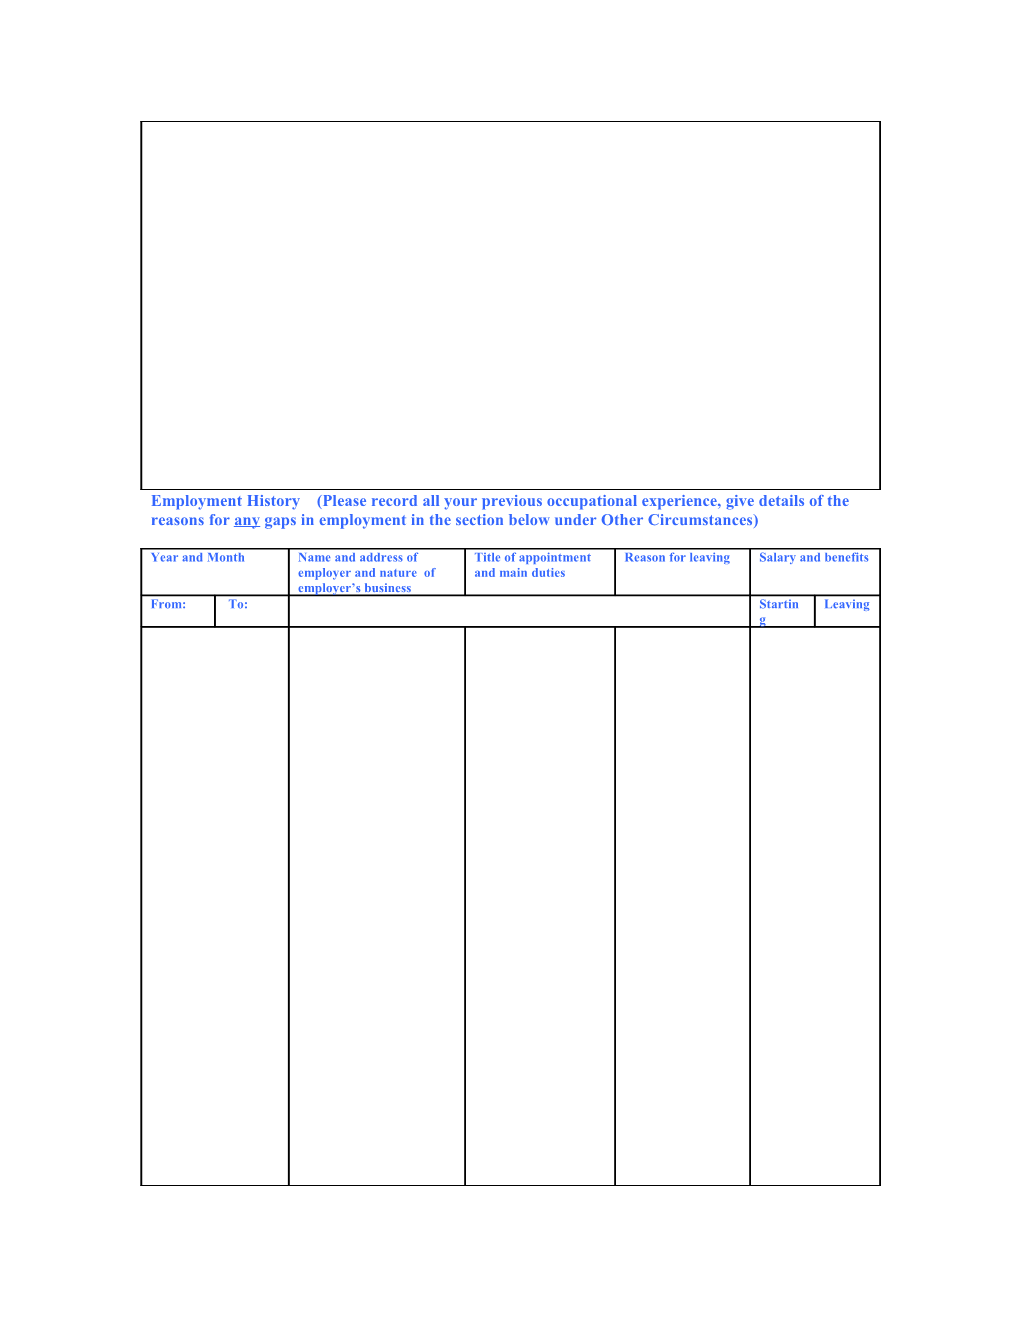 Confidential Threshold Application Form